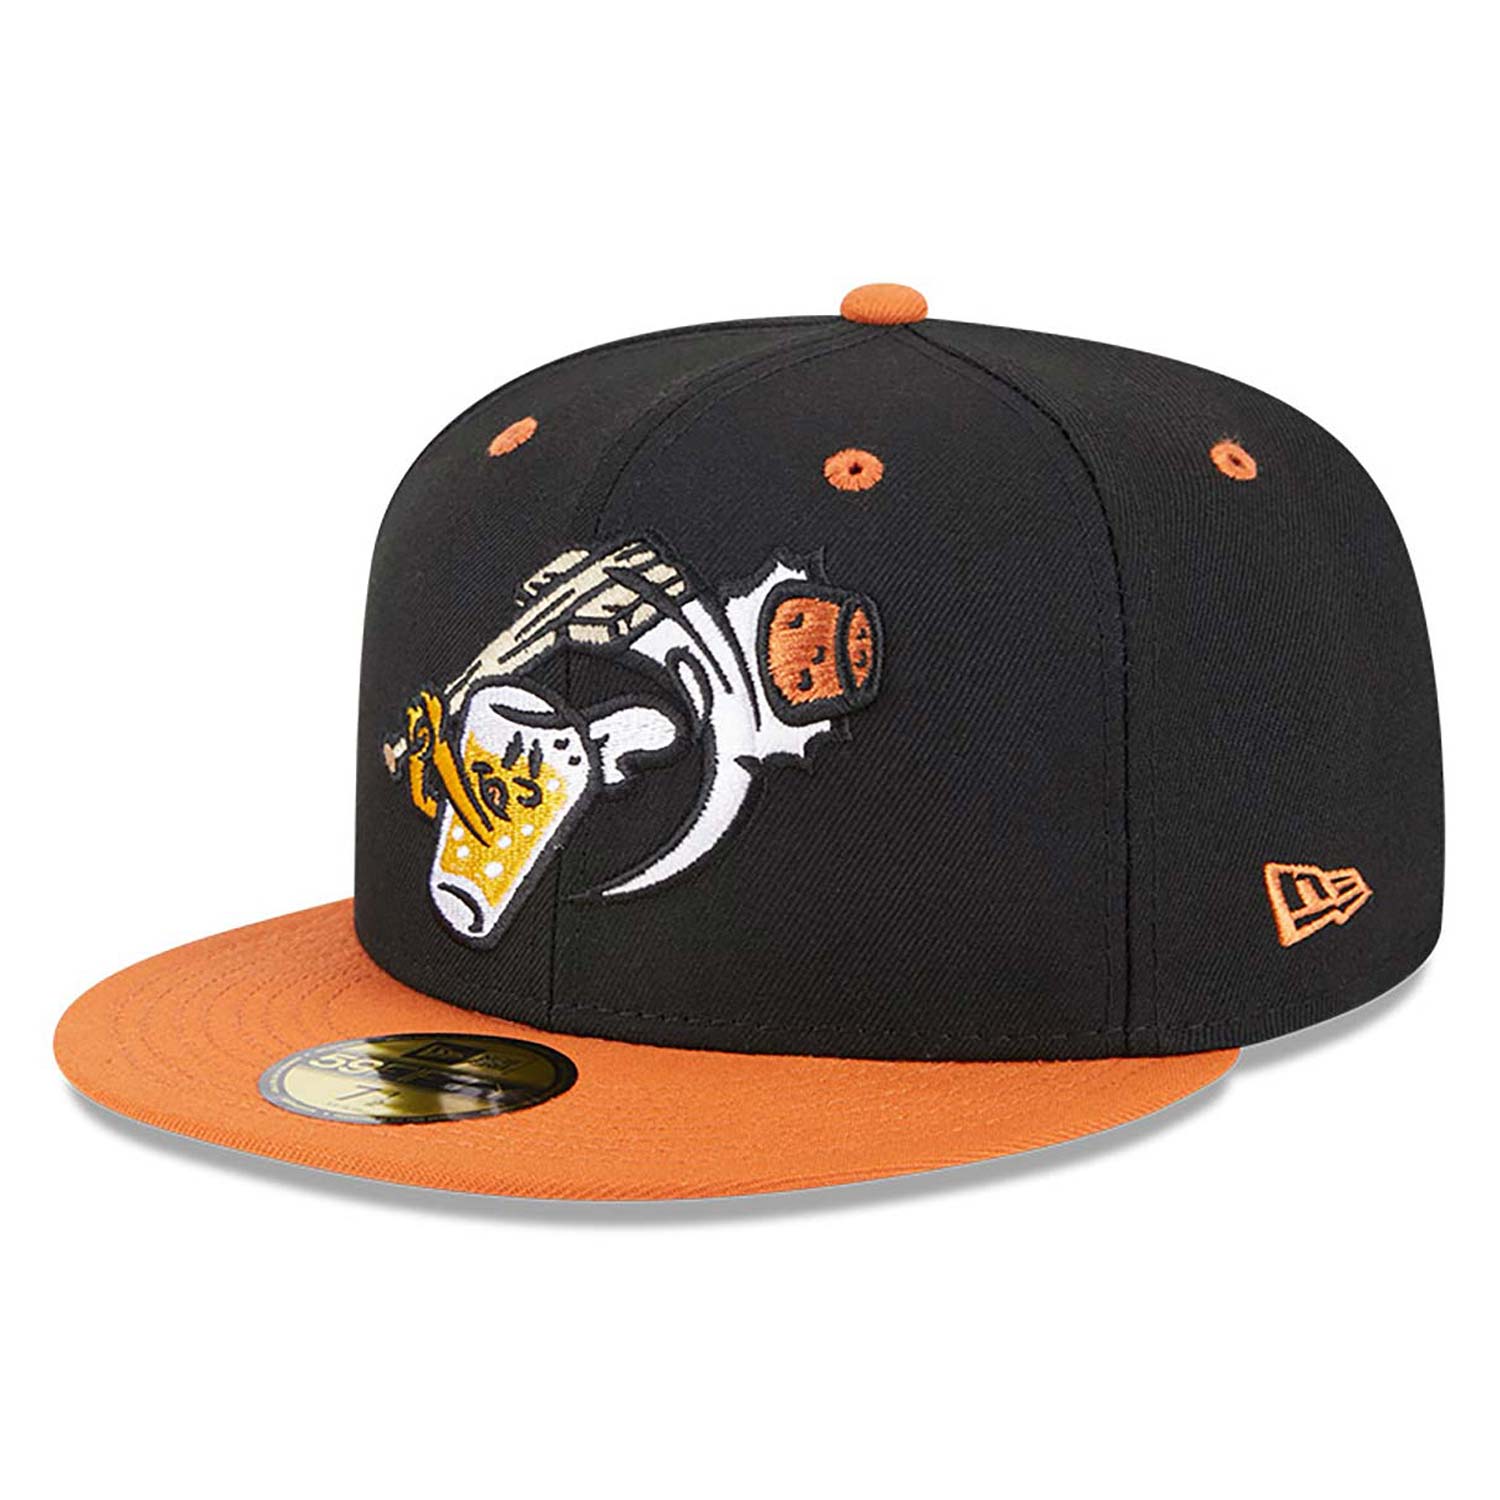 West Michigan White Caps MiLB Theme Nights Black 59FIFTY Fitted Cap